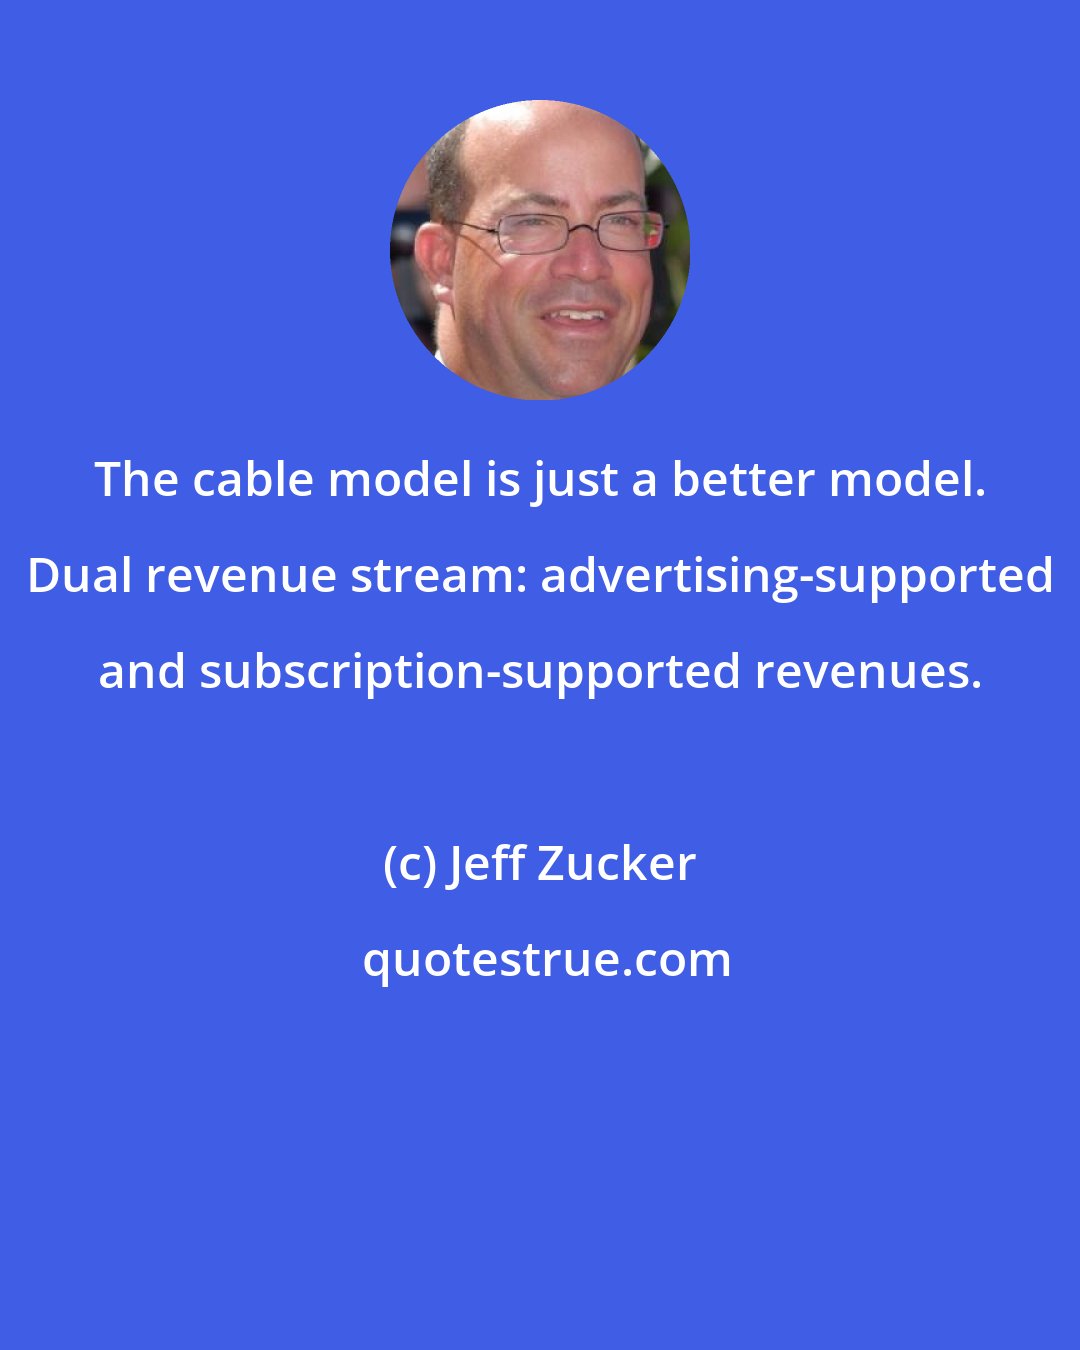 Jeff Zucker: The cable model is just a better model. Dual revenue stream: advertising-supported and subscription-supported revenues.